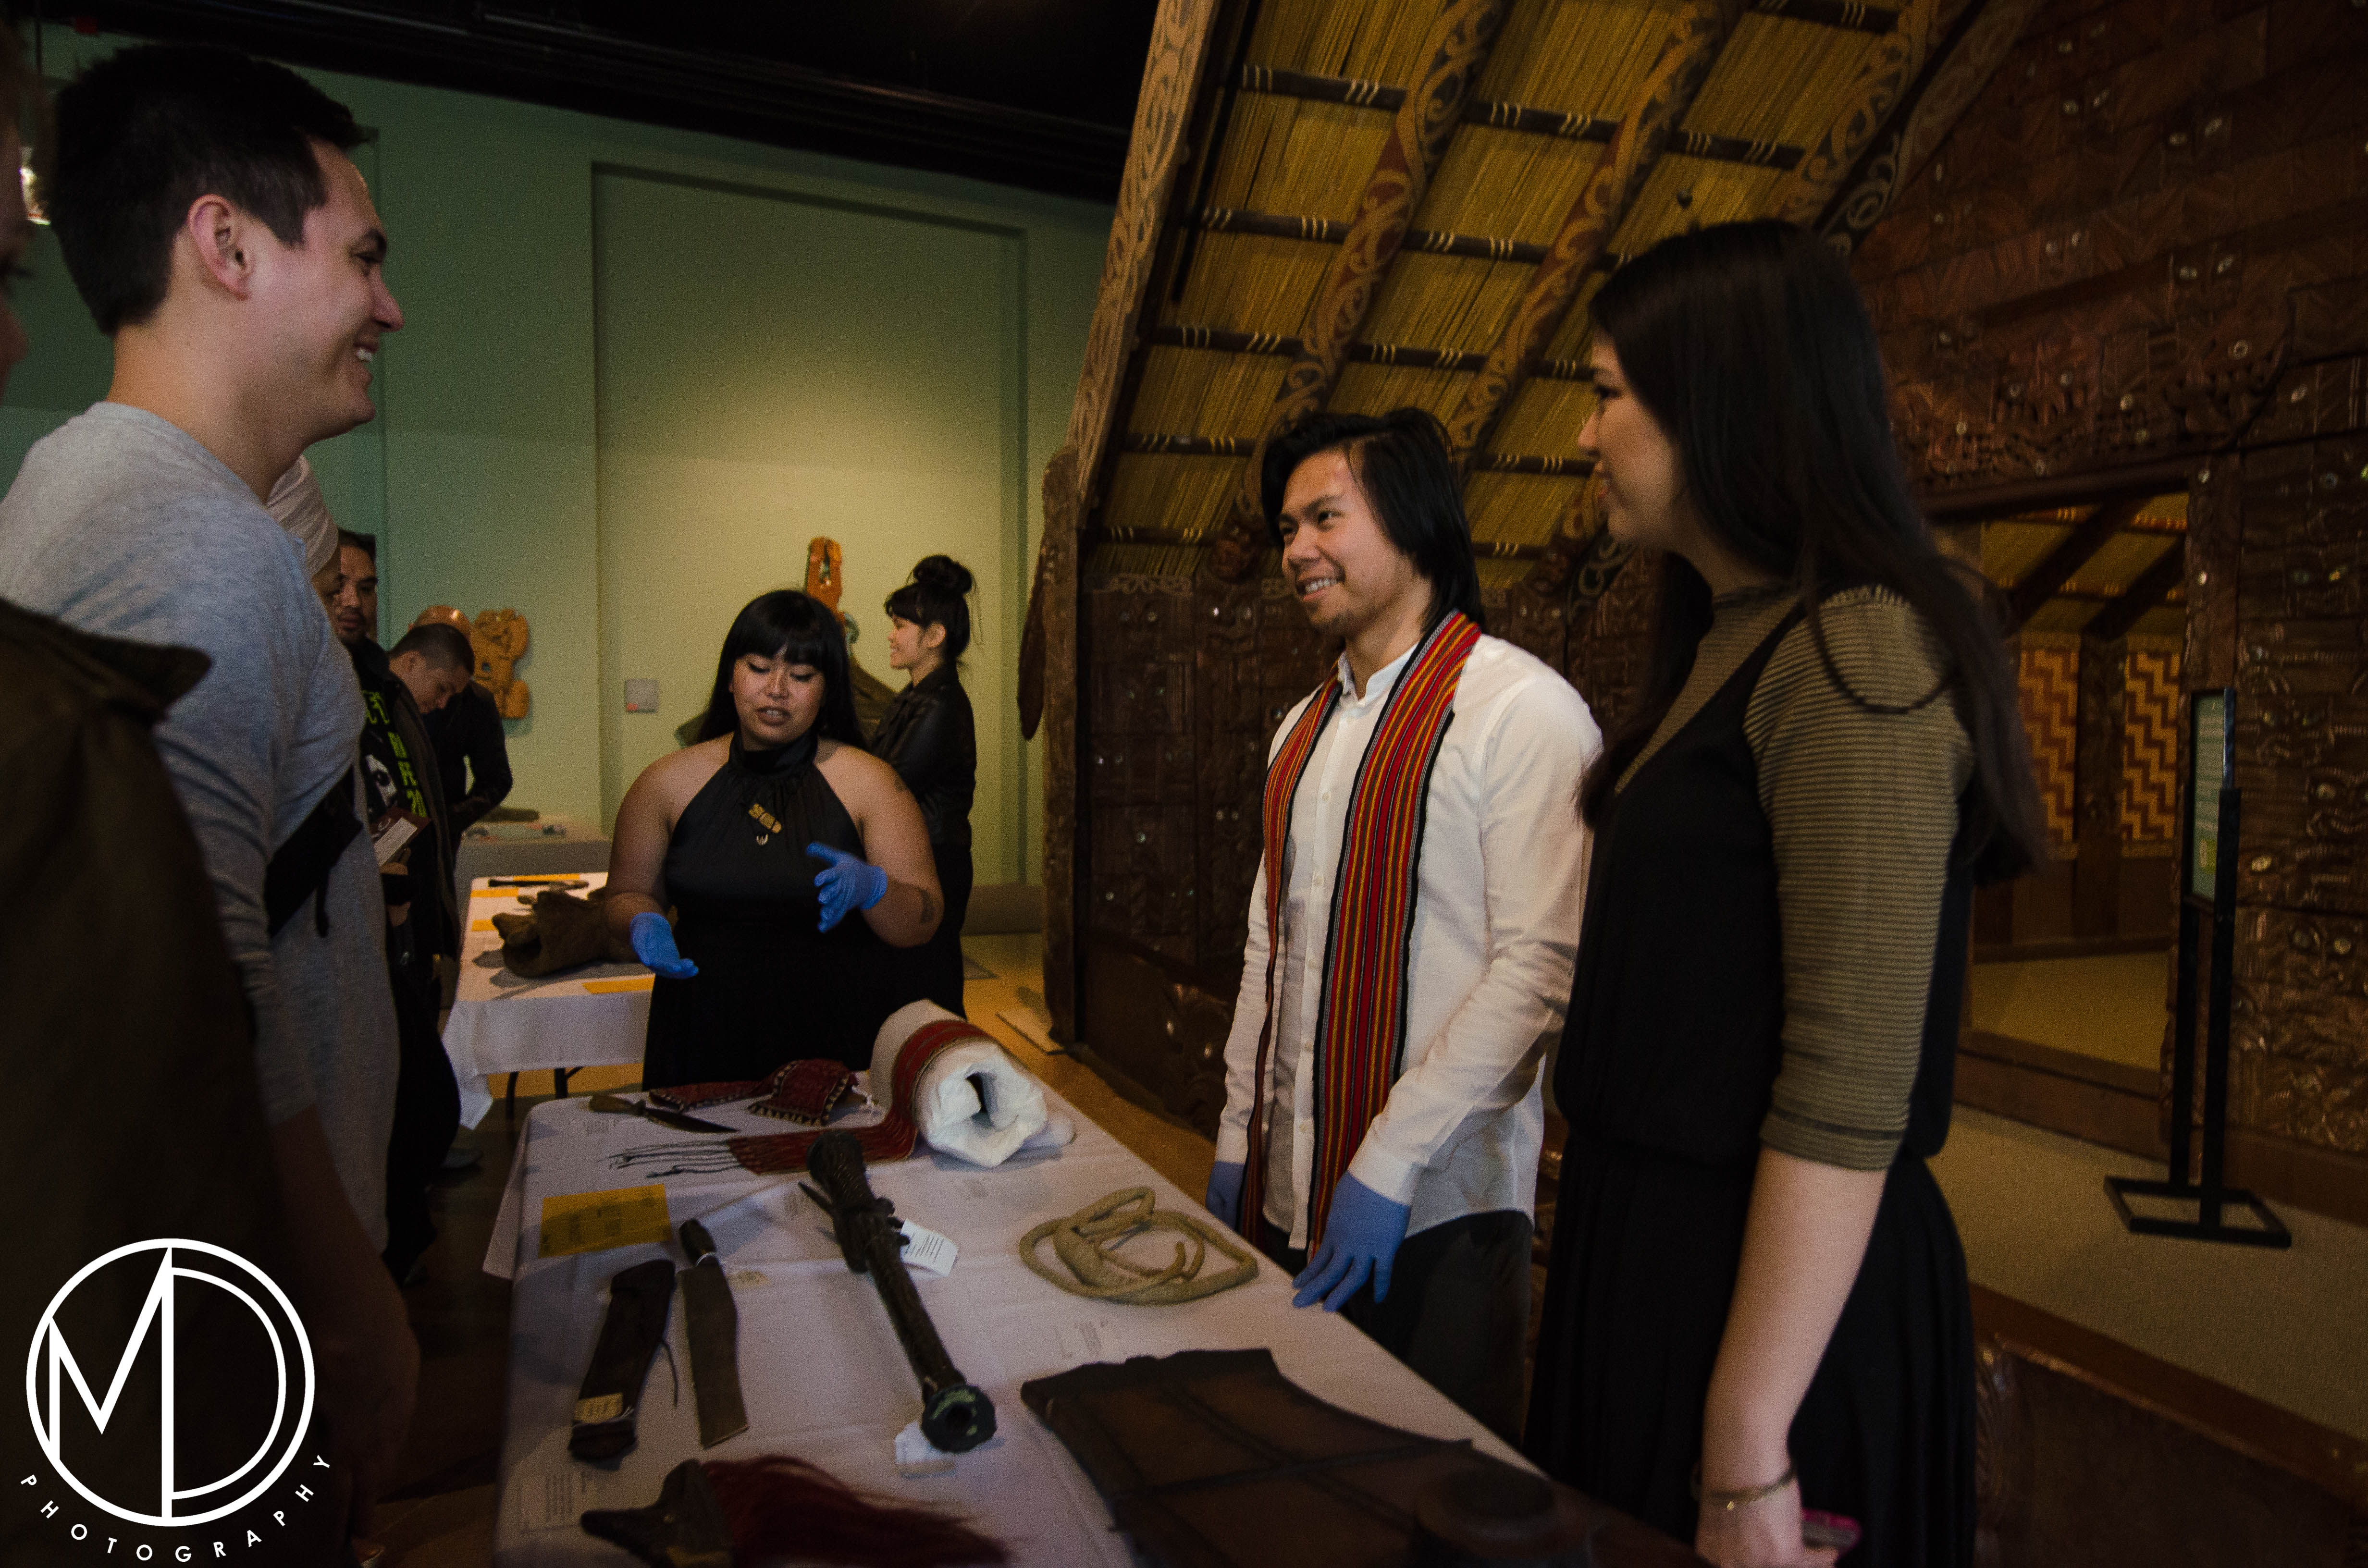 Avigail Bautista, Tristan Espinoza, and Loren Ibach watch over the object table. (c) Field Museum of Natural History - CC BY-NC 4.0